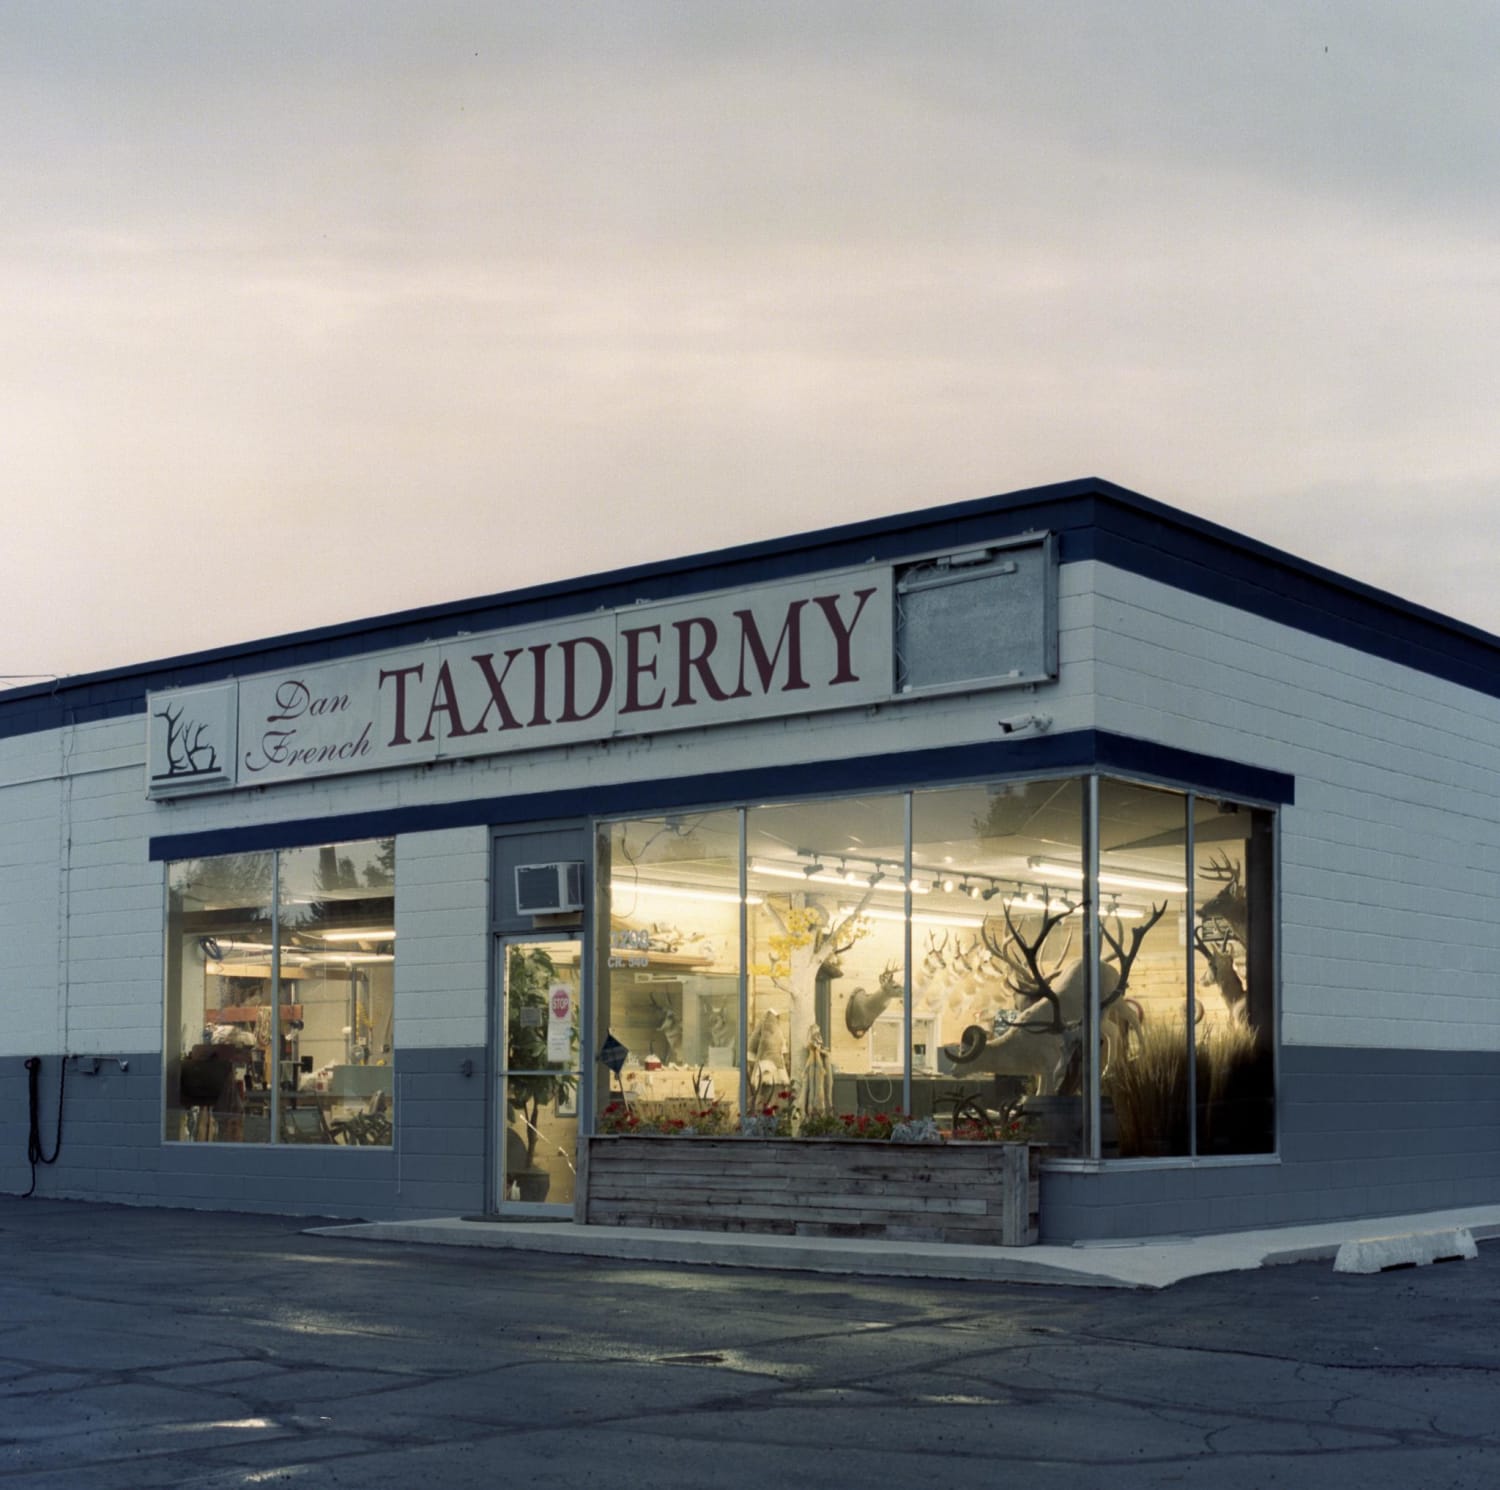 Taxidermy at Blue Hour | Hasselblad 500 C/M, 80mm 2.8, Expired Kodak Portra 400